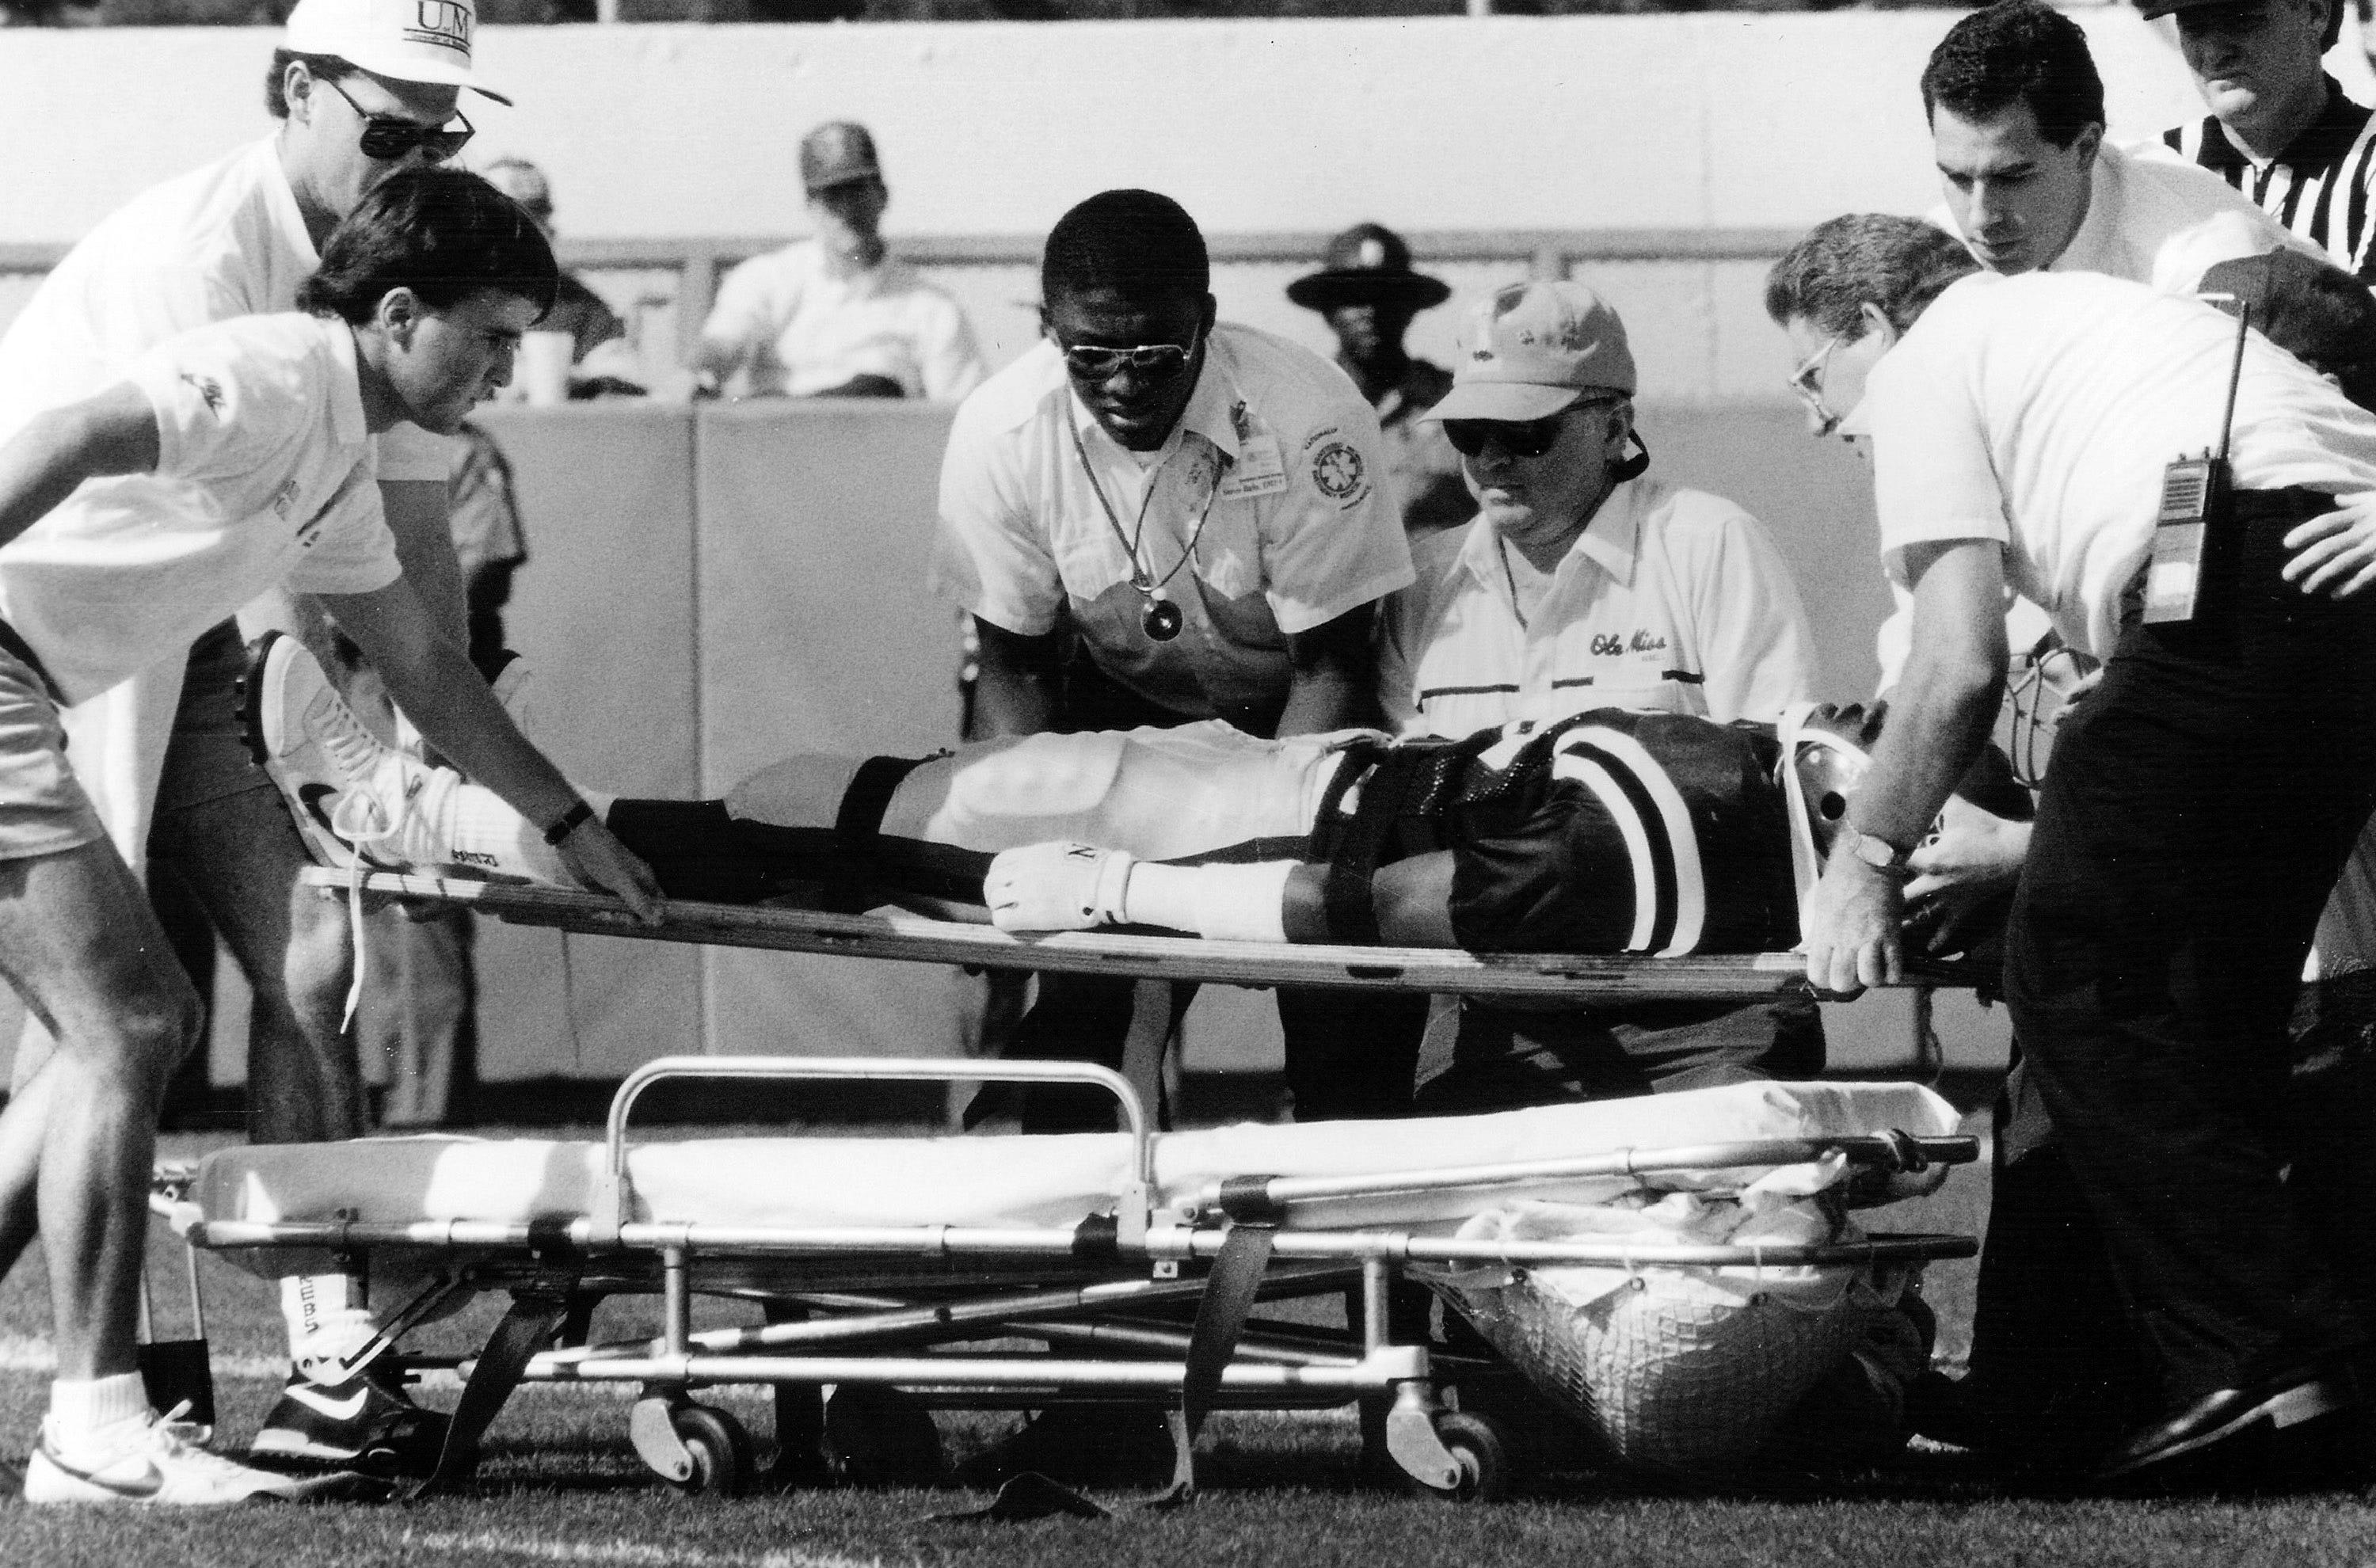 In this Oct. 28, 1989, file photo, Mississippi defensive back Roy Lee "Chucky" Mullins is placed on a stretcher after suffering a paralyzing neck injury as he made a head-first tackle against Vanderbilt fullback Brad Gaines following a short pass in an NCAA college football game in Oxford, Miss. The tackle paralyzed Mullins from the neck down. He died on May 6, 1991 of complications resulting from the injury, and since then his No. 38 jersey has been given to a Mississippi defender to wear as the Chucky Mullins Courage Award.